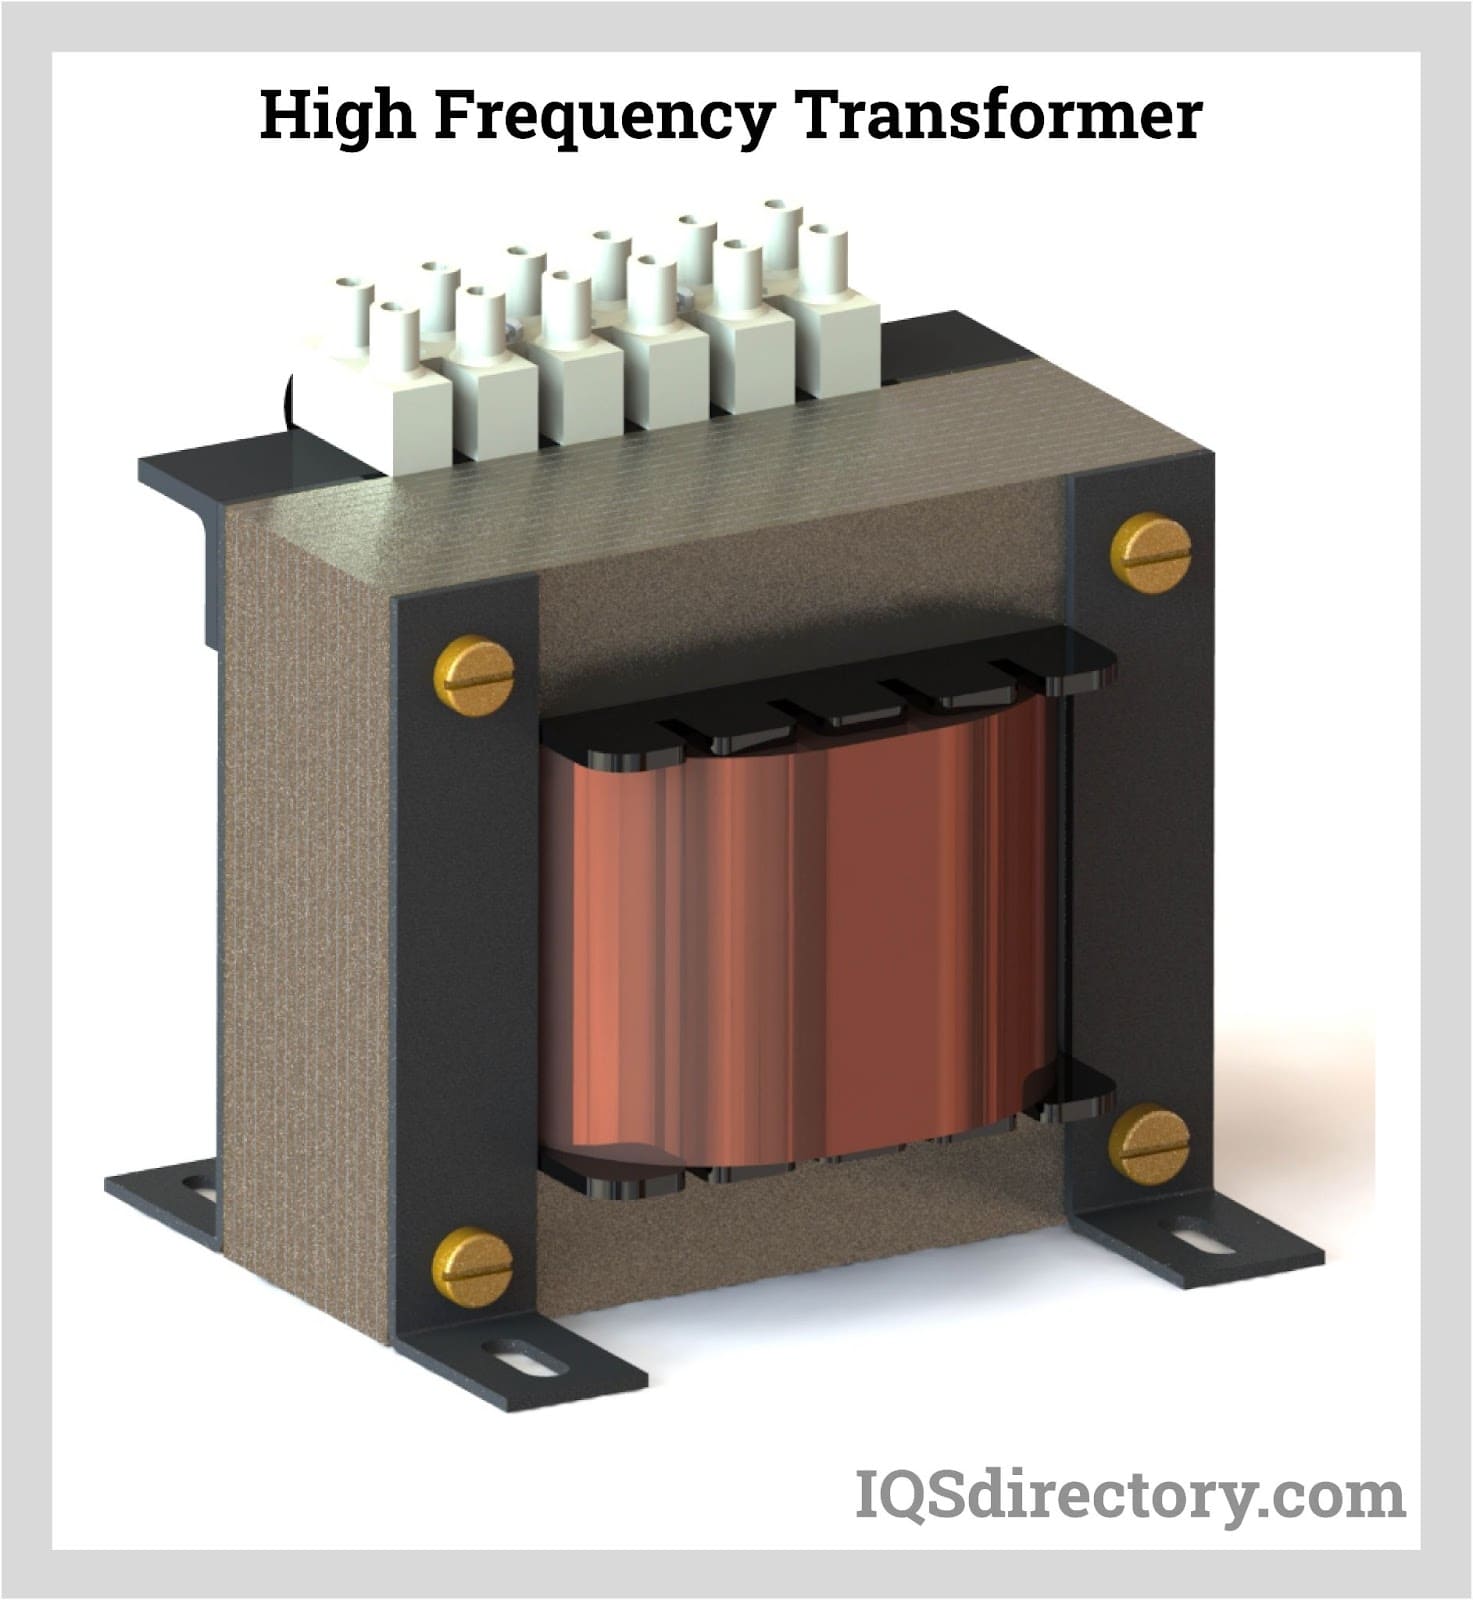 High Voltage Power Supply: Types, Applications, Benefits, and